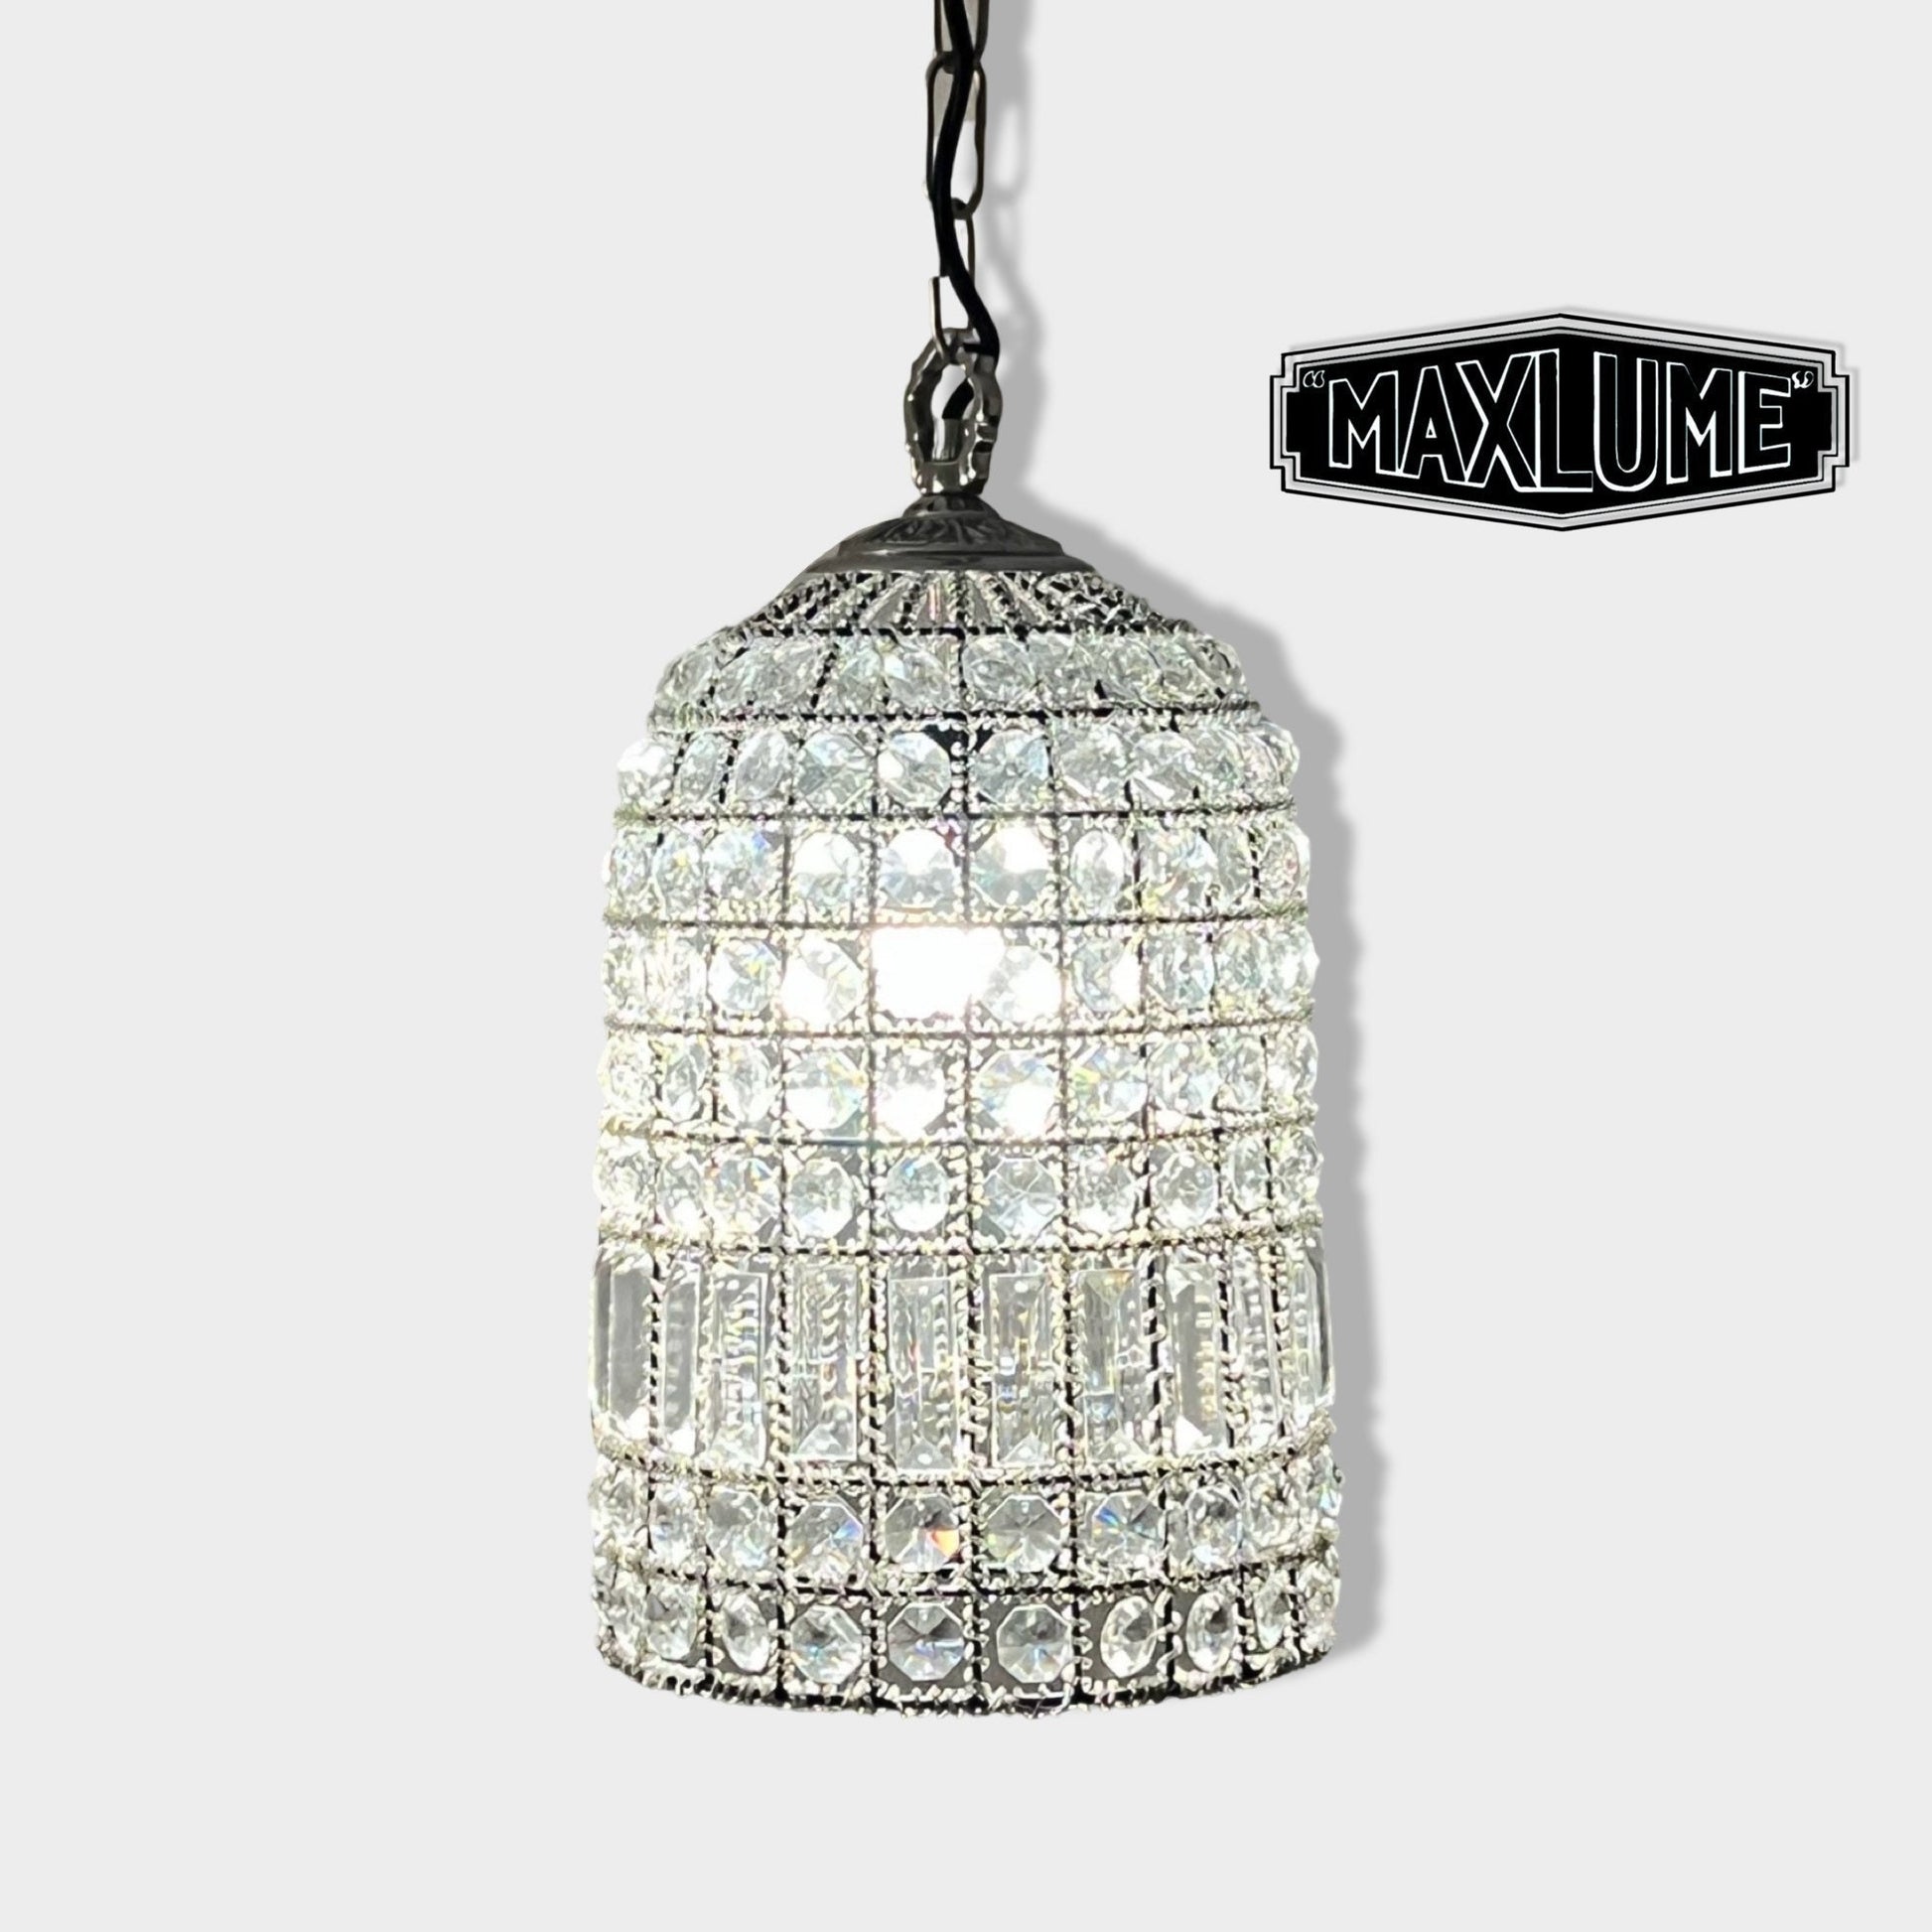 Bixley ~ French Glass Bird Cage Luxury Chandelier Light Dining Room Ceiling Pendant 9.5 Inch